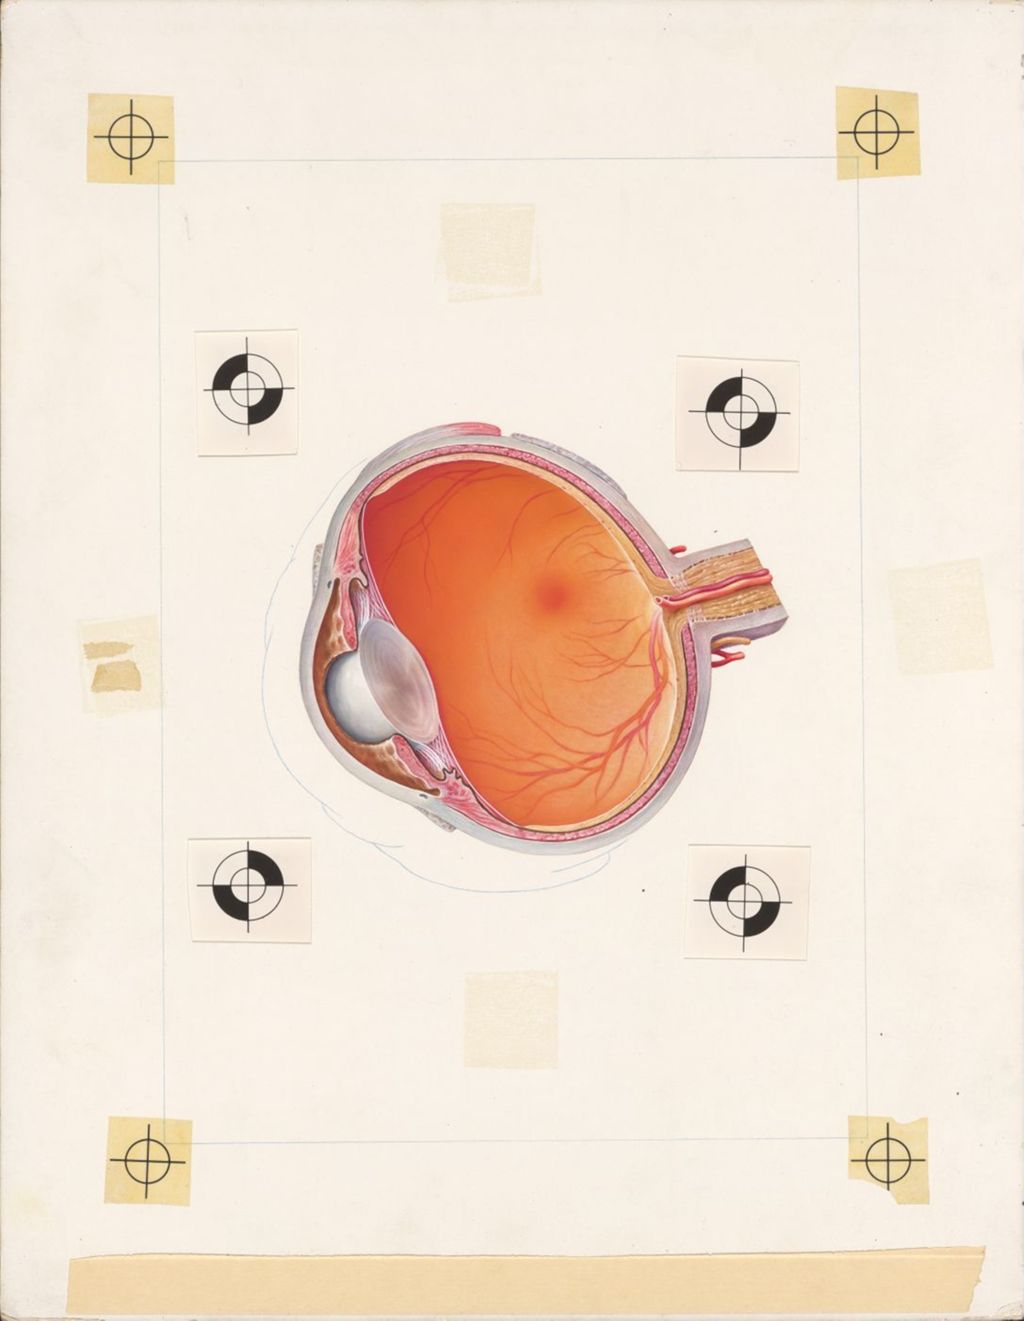 Miniature of The Normal Eye, Progressively Deeper Dissections, D, Obliquely Sectioned Eye Showing the Relationship of Its Coats